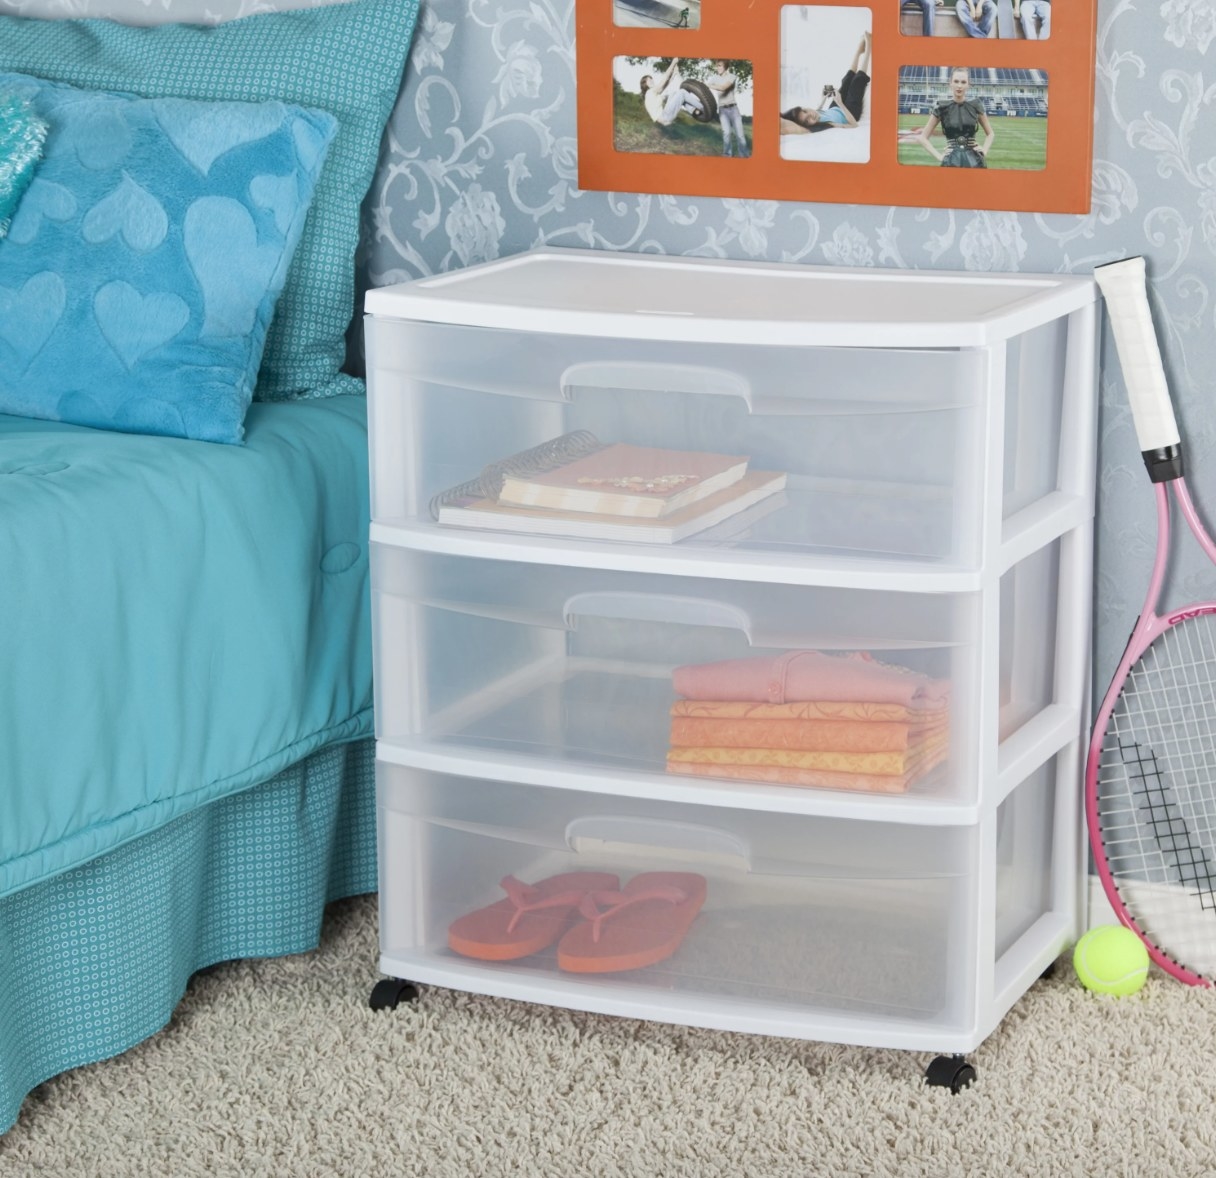 a clear plastic rolling cart with three drawers filled with folded shirts, a pair of flip flops, and books in a bedroom